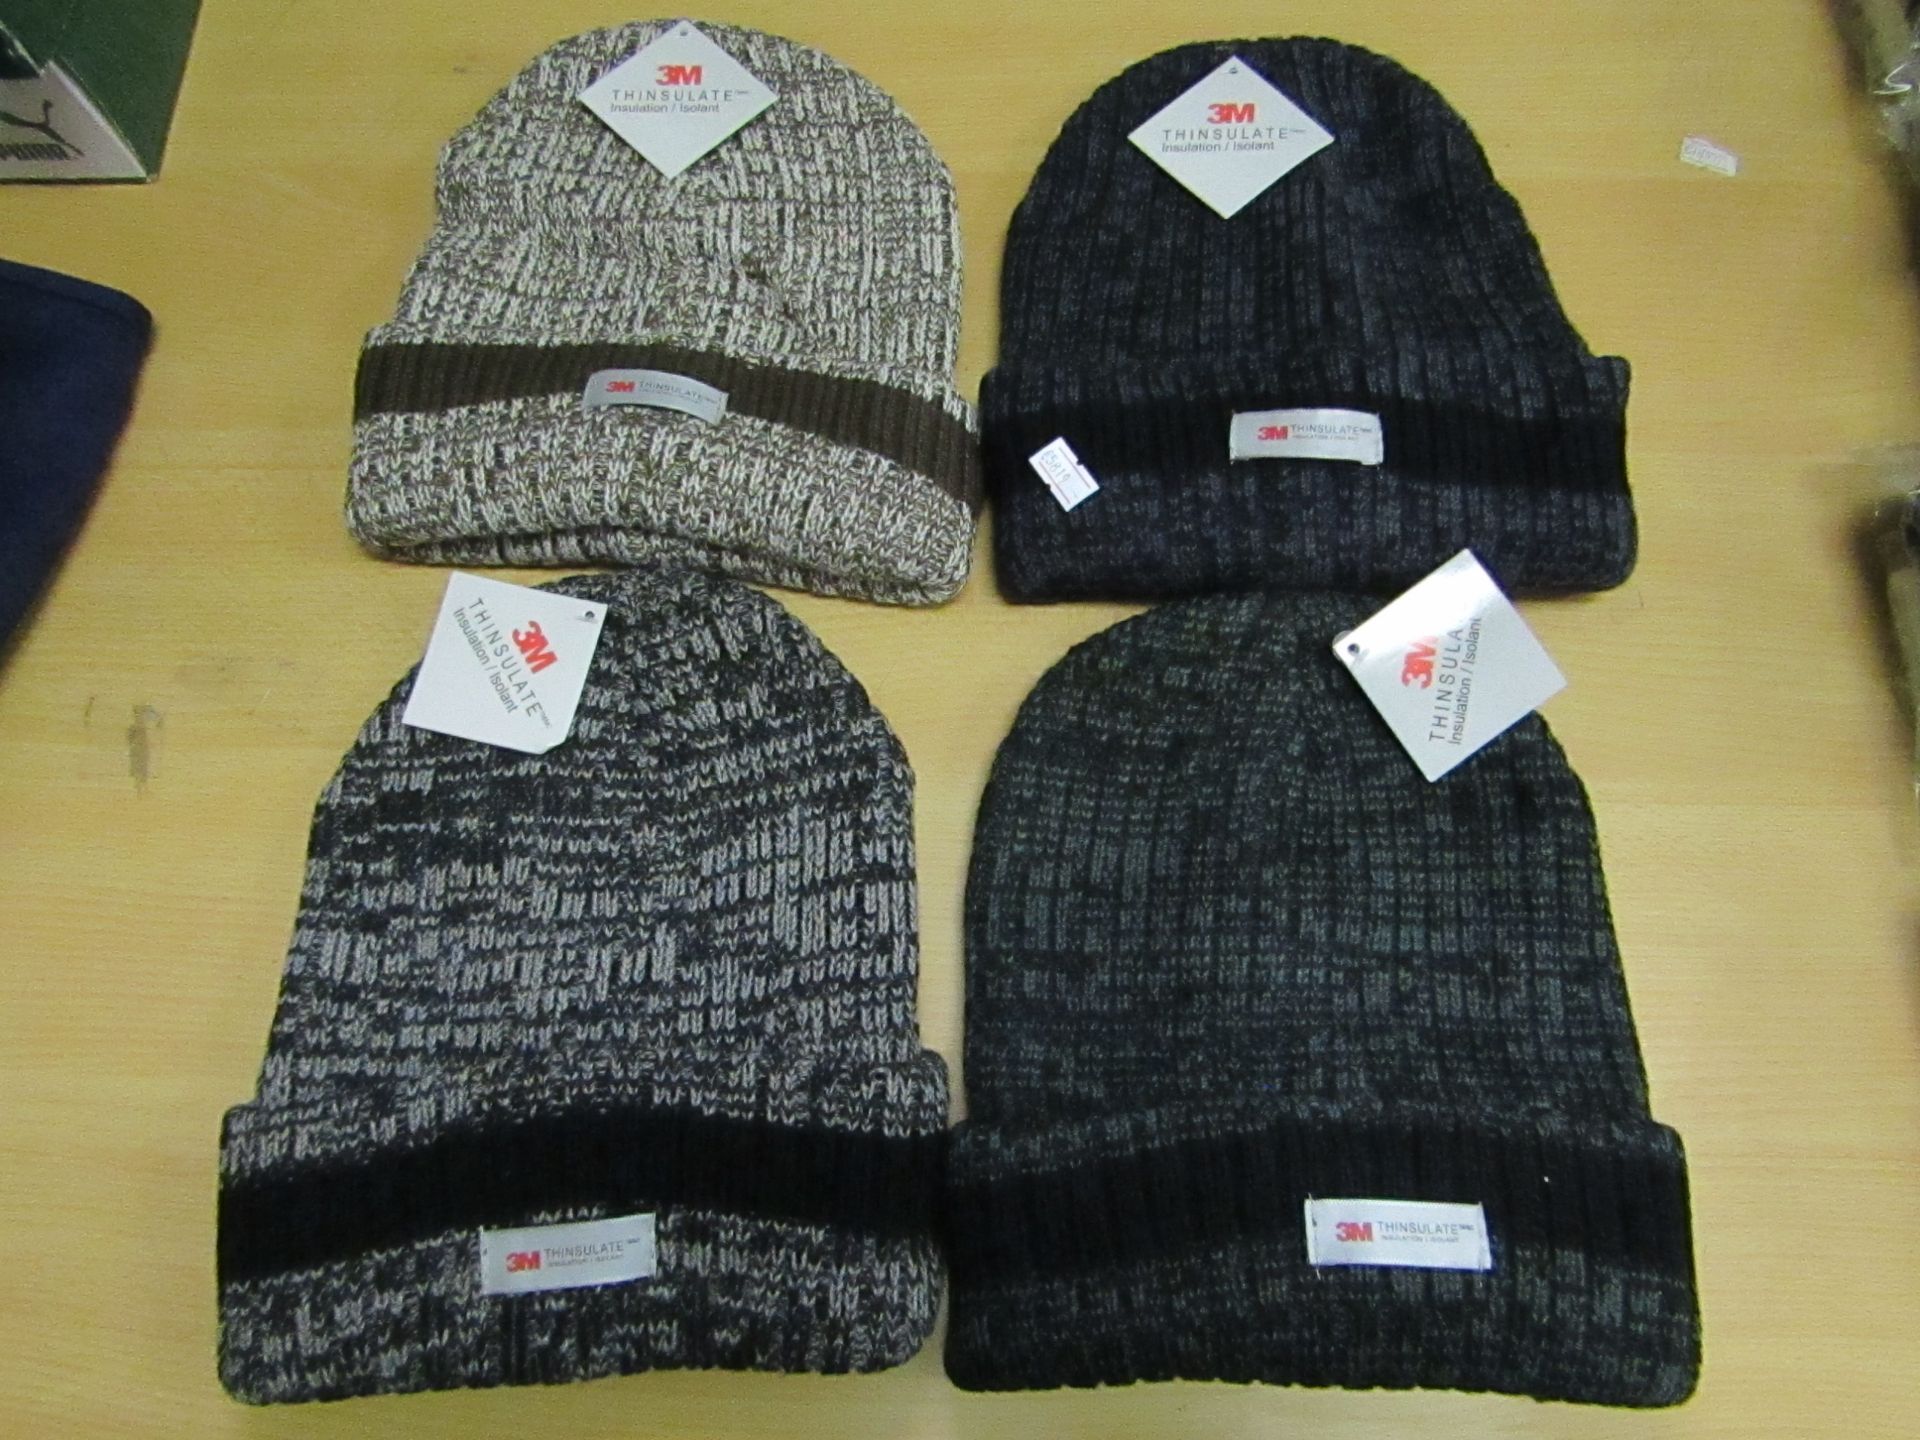 4 X Heat Insulation hats 3M all new with Tags (see picture for colour & Design)